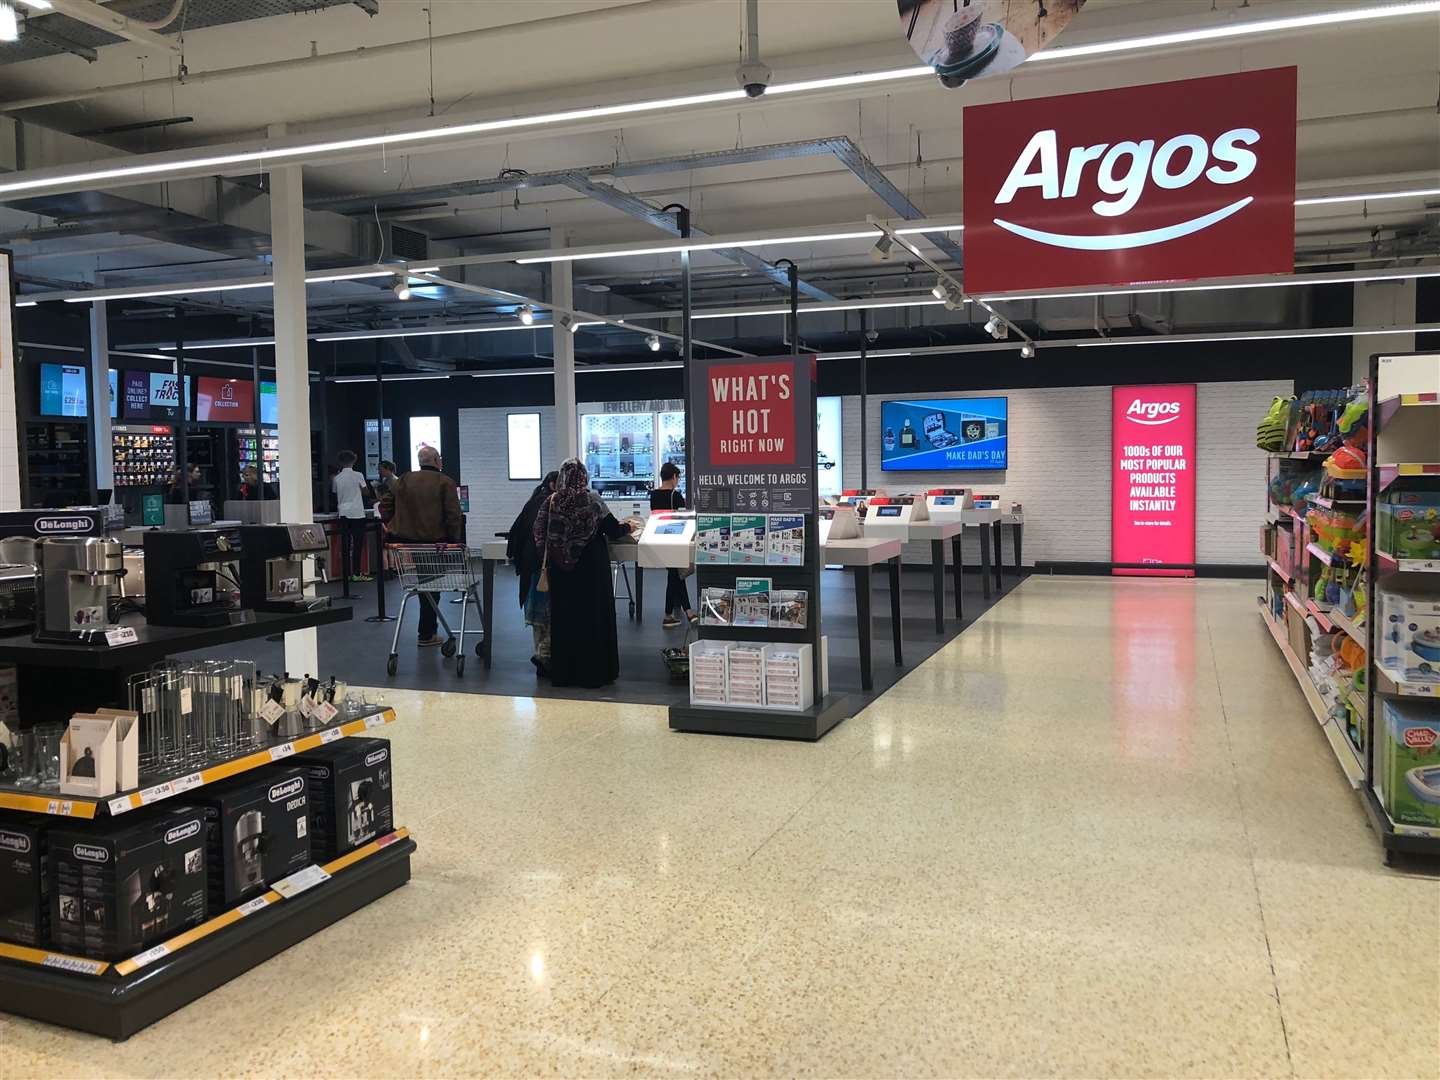 Argos closed the case after saying it had been delivered